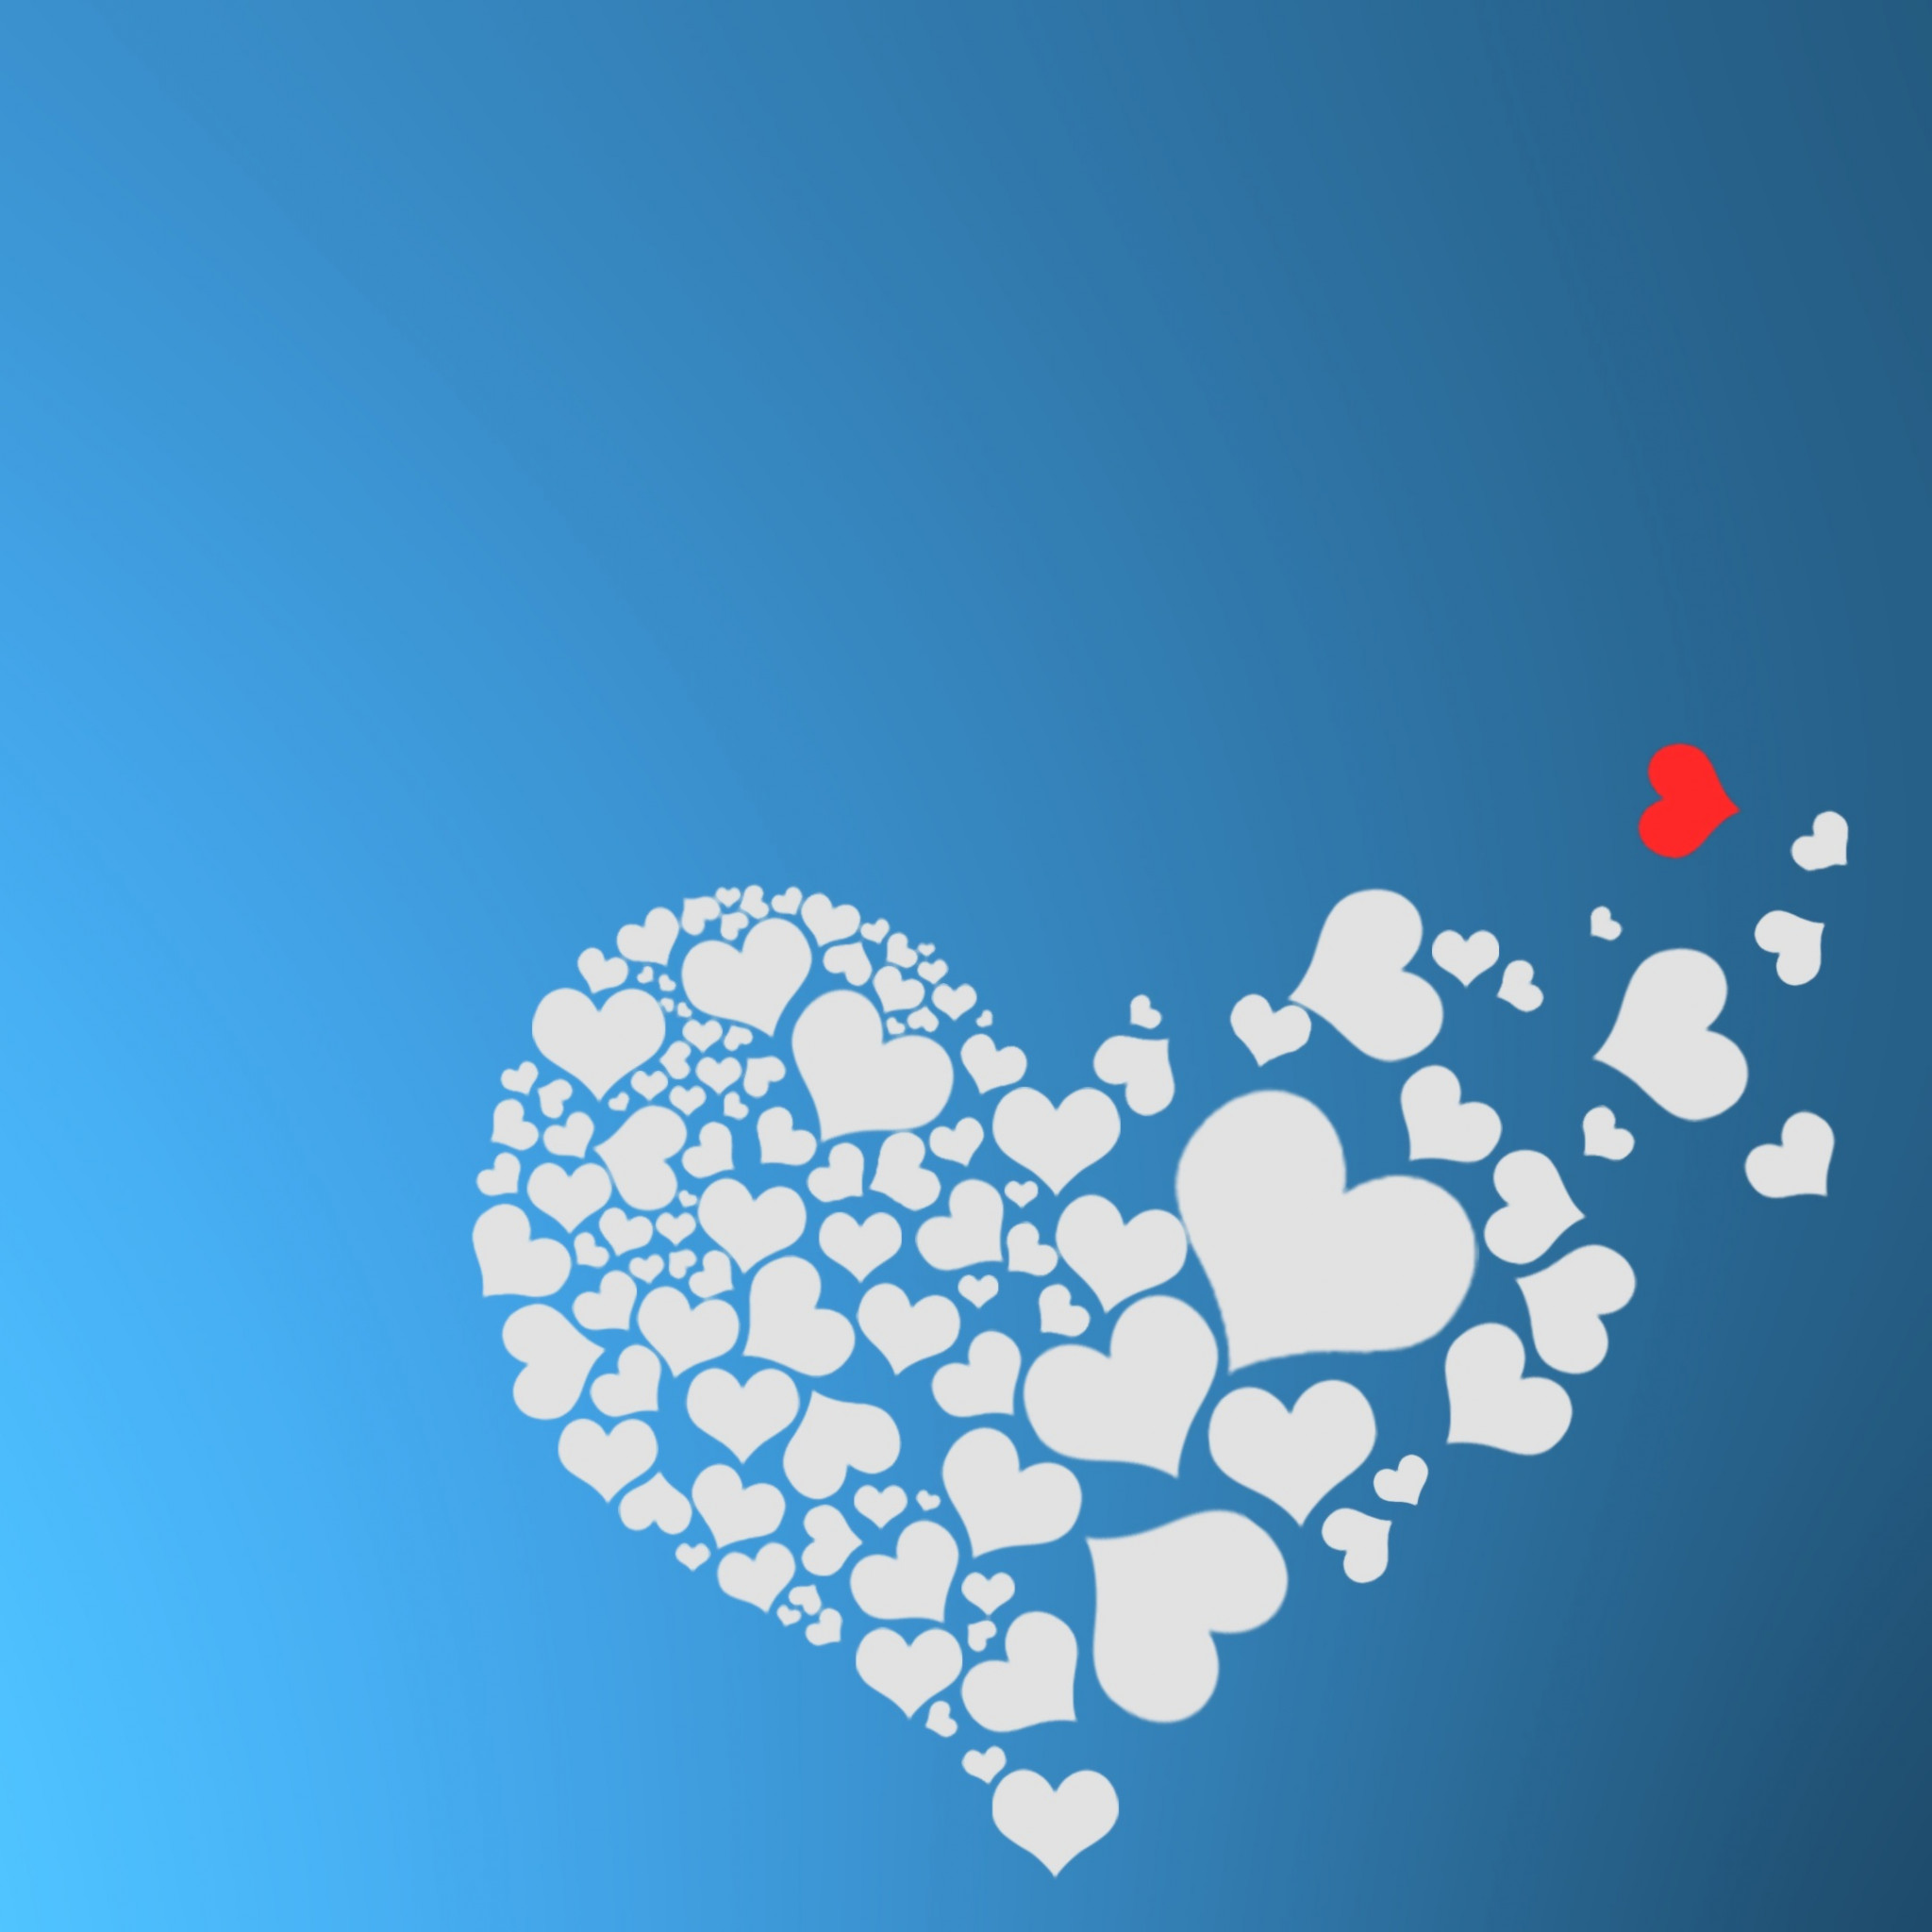 The hearts of love wallpaper 2048x2048